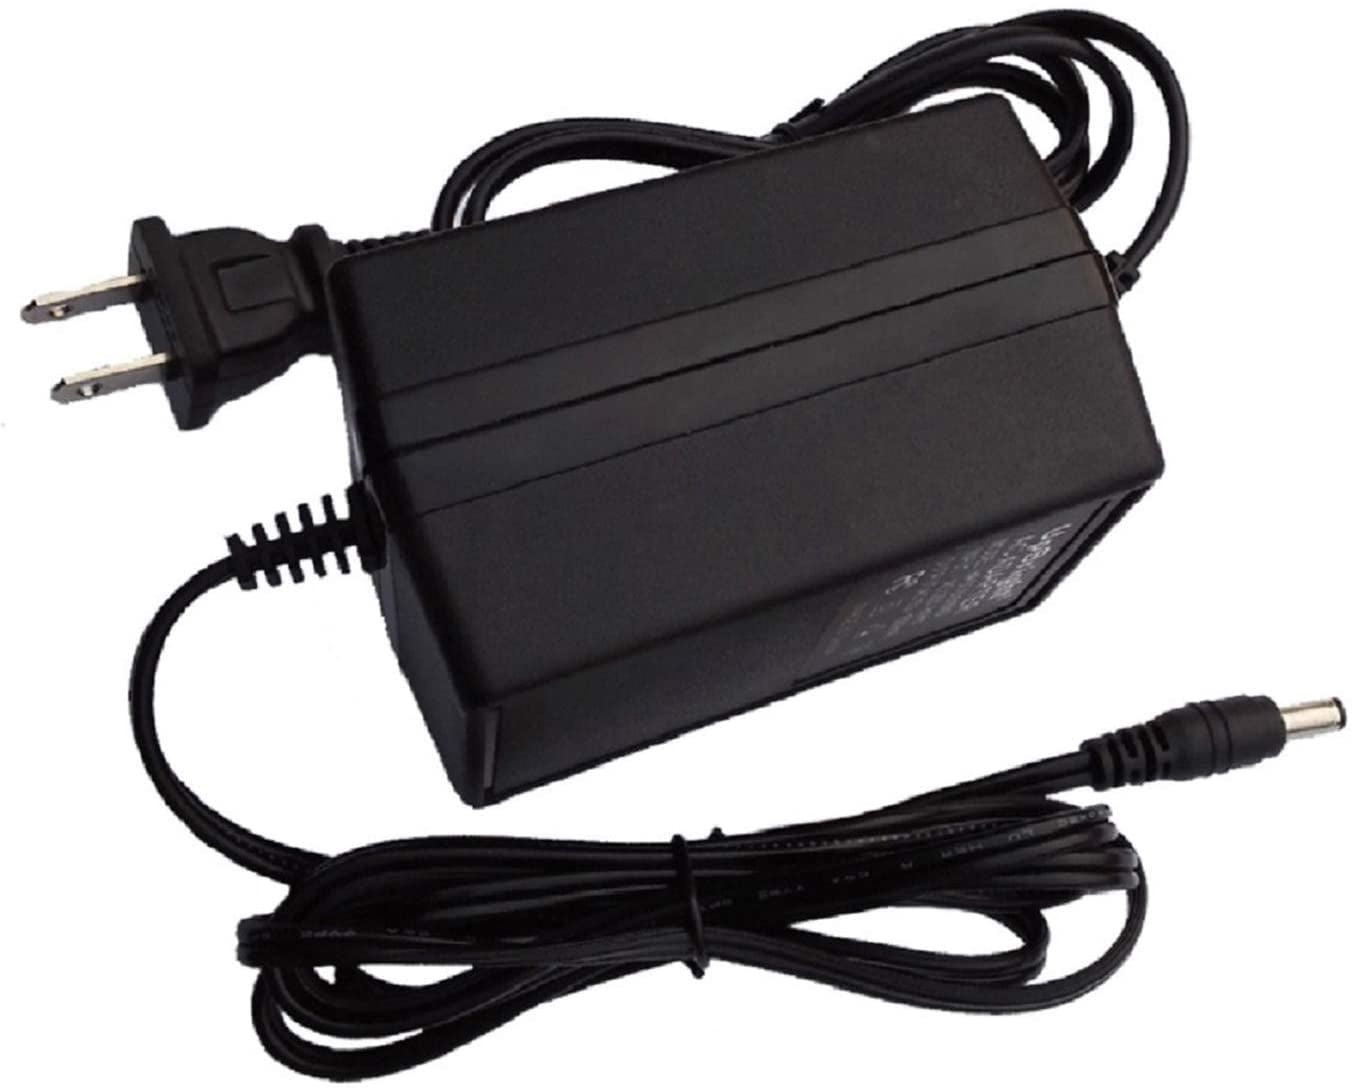 UPBRIGHT NEW AC / AC Adapter For Black & Decker 5100685-20